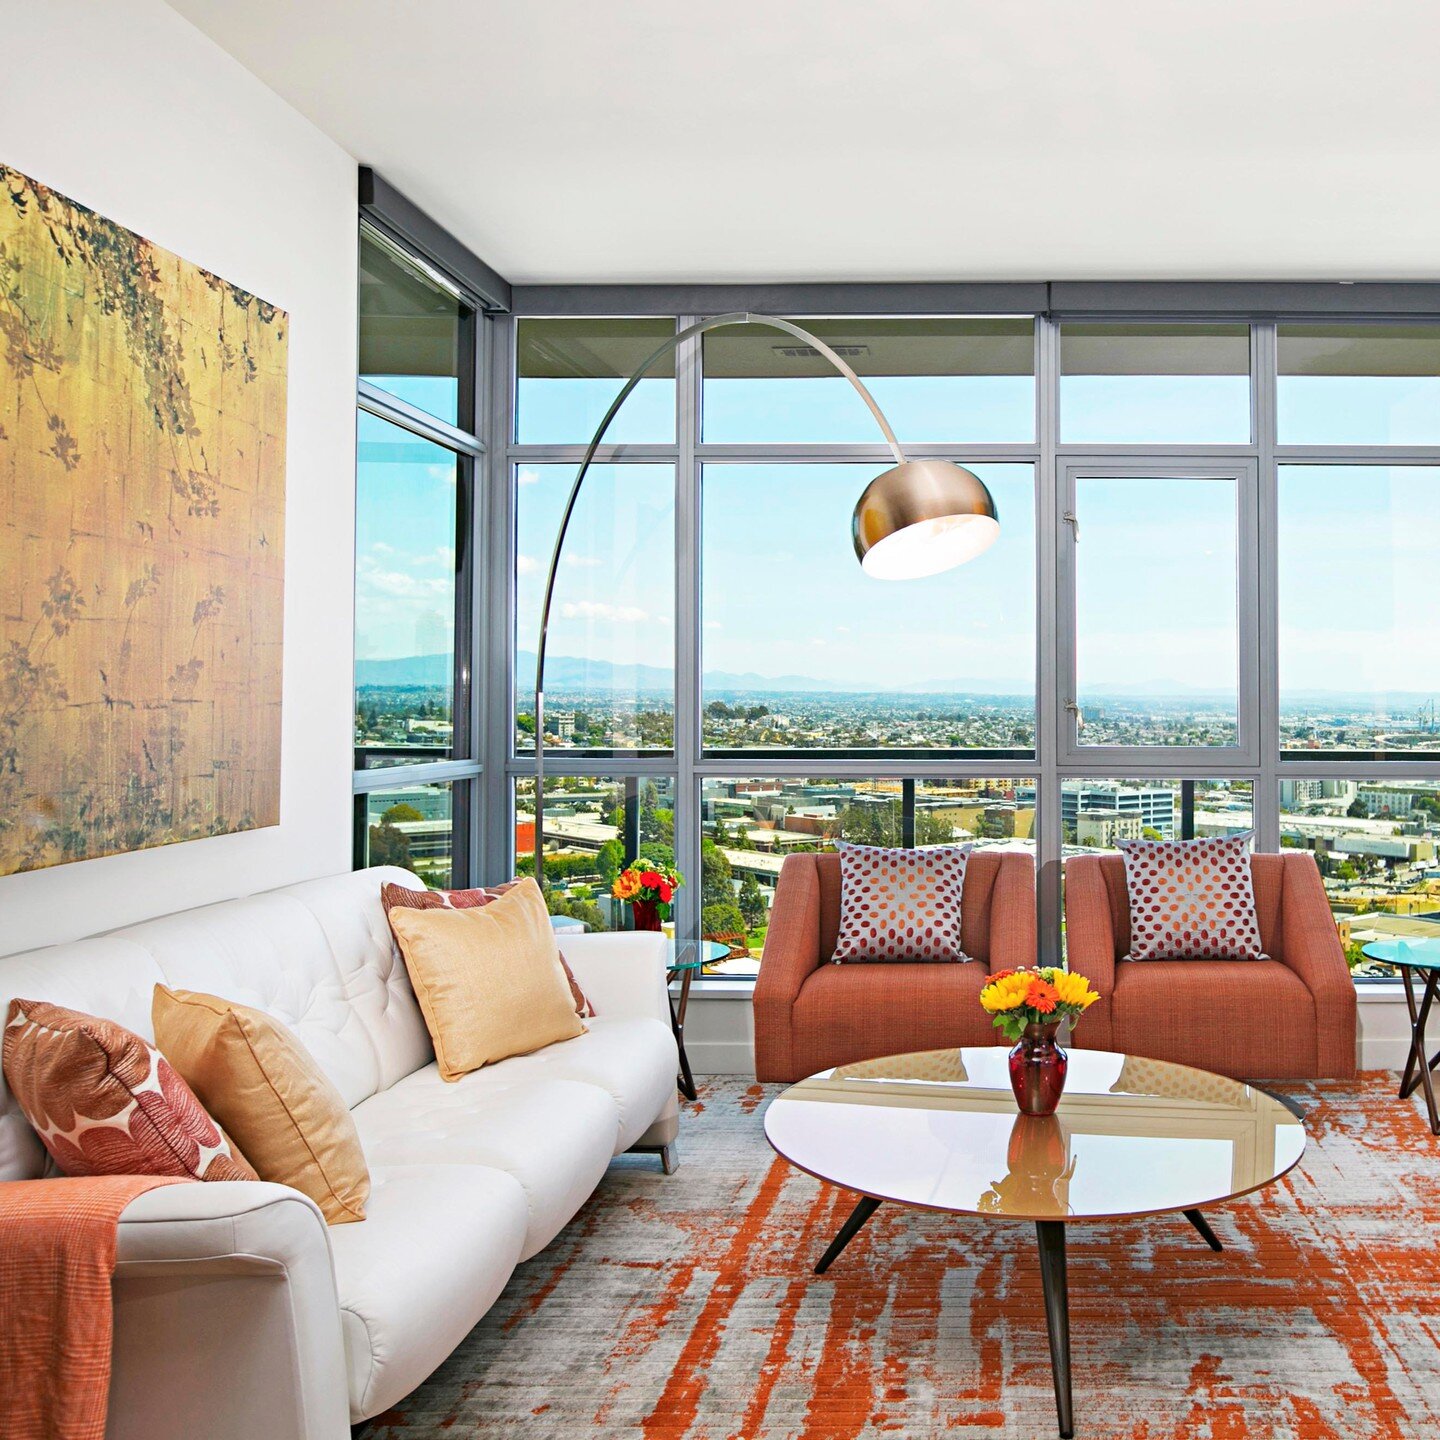 This San Diego loft apartment offers spectacular vistas of the city skyline and Balboa Park. It's vivid oranges and yellows bring to life an inviting atmosphere of light and comfort.

Design by SYLVIA BEEZ for M.A.P. INTERIORS

#sandiegohomes #interi